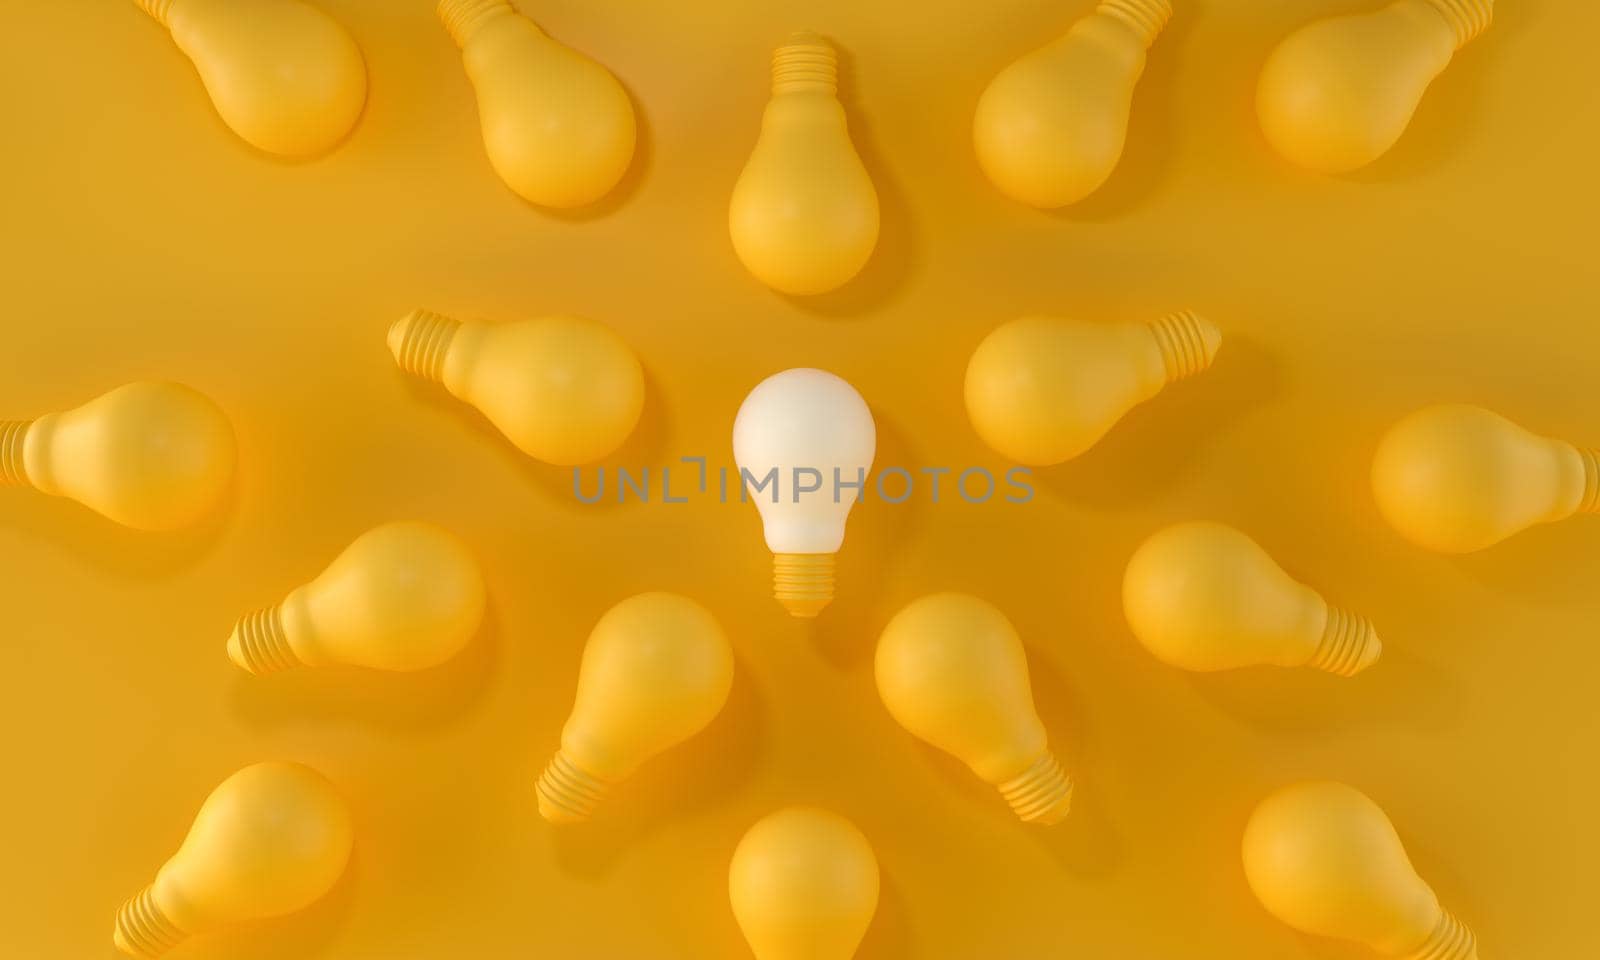 Light Bulb white Standing Out From the Crowd on yellow background. ideas and creativity concept. 3d rendering.